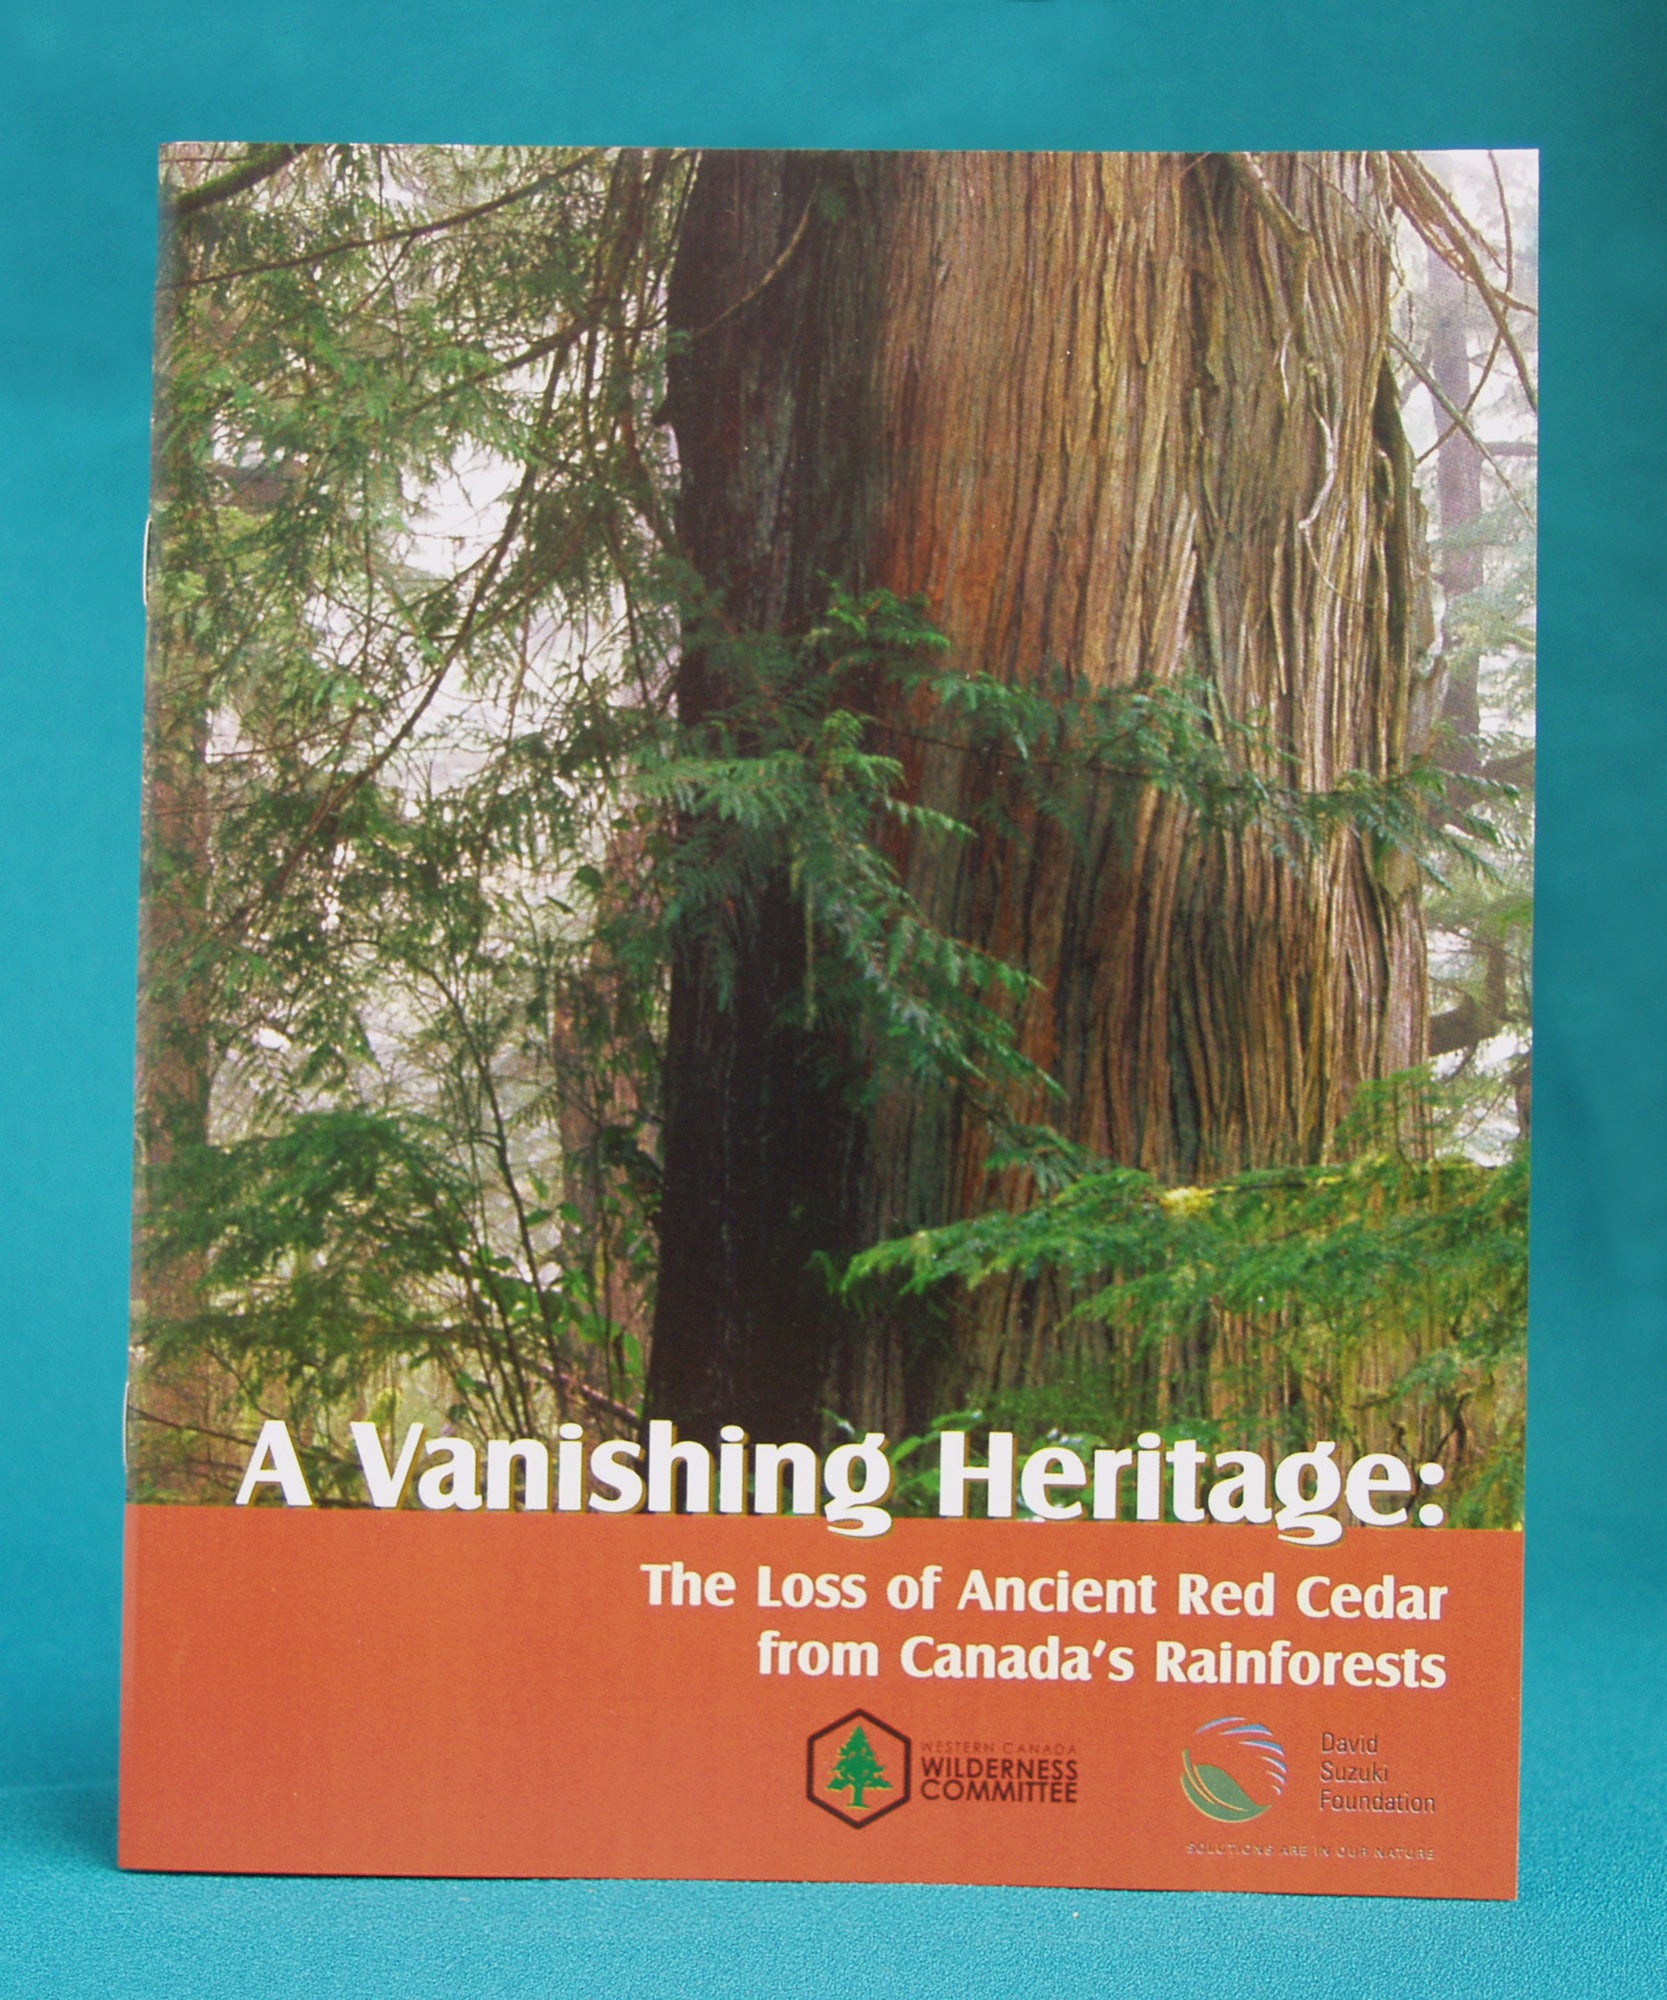 A book. There is a large cedar tree on the cover. Text on the book's cover says "A Vanishing Heritage: The Loss of Ancient Red Cedar from Canada's Rainforests." End of text. There are various logos on the bottom. End of image description.